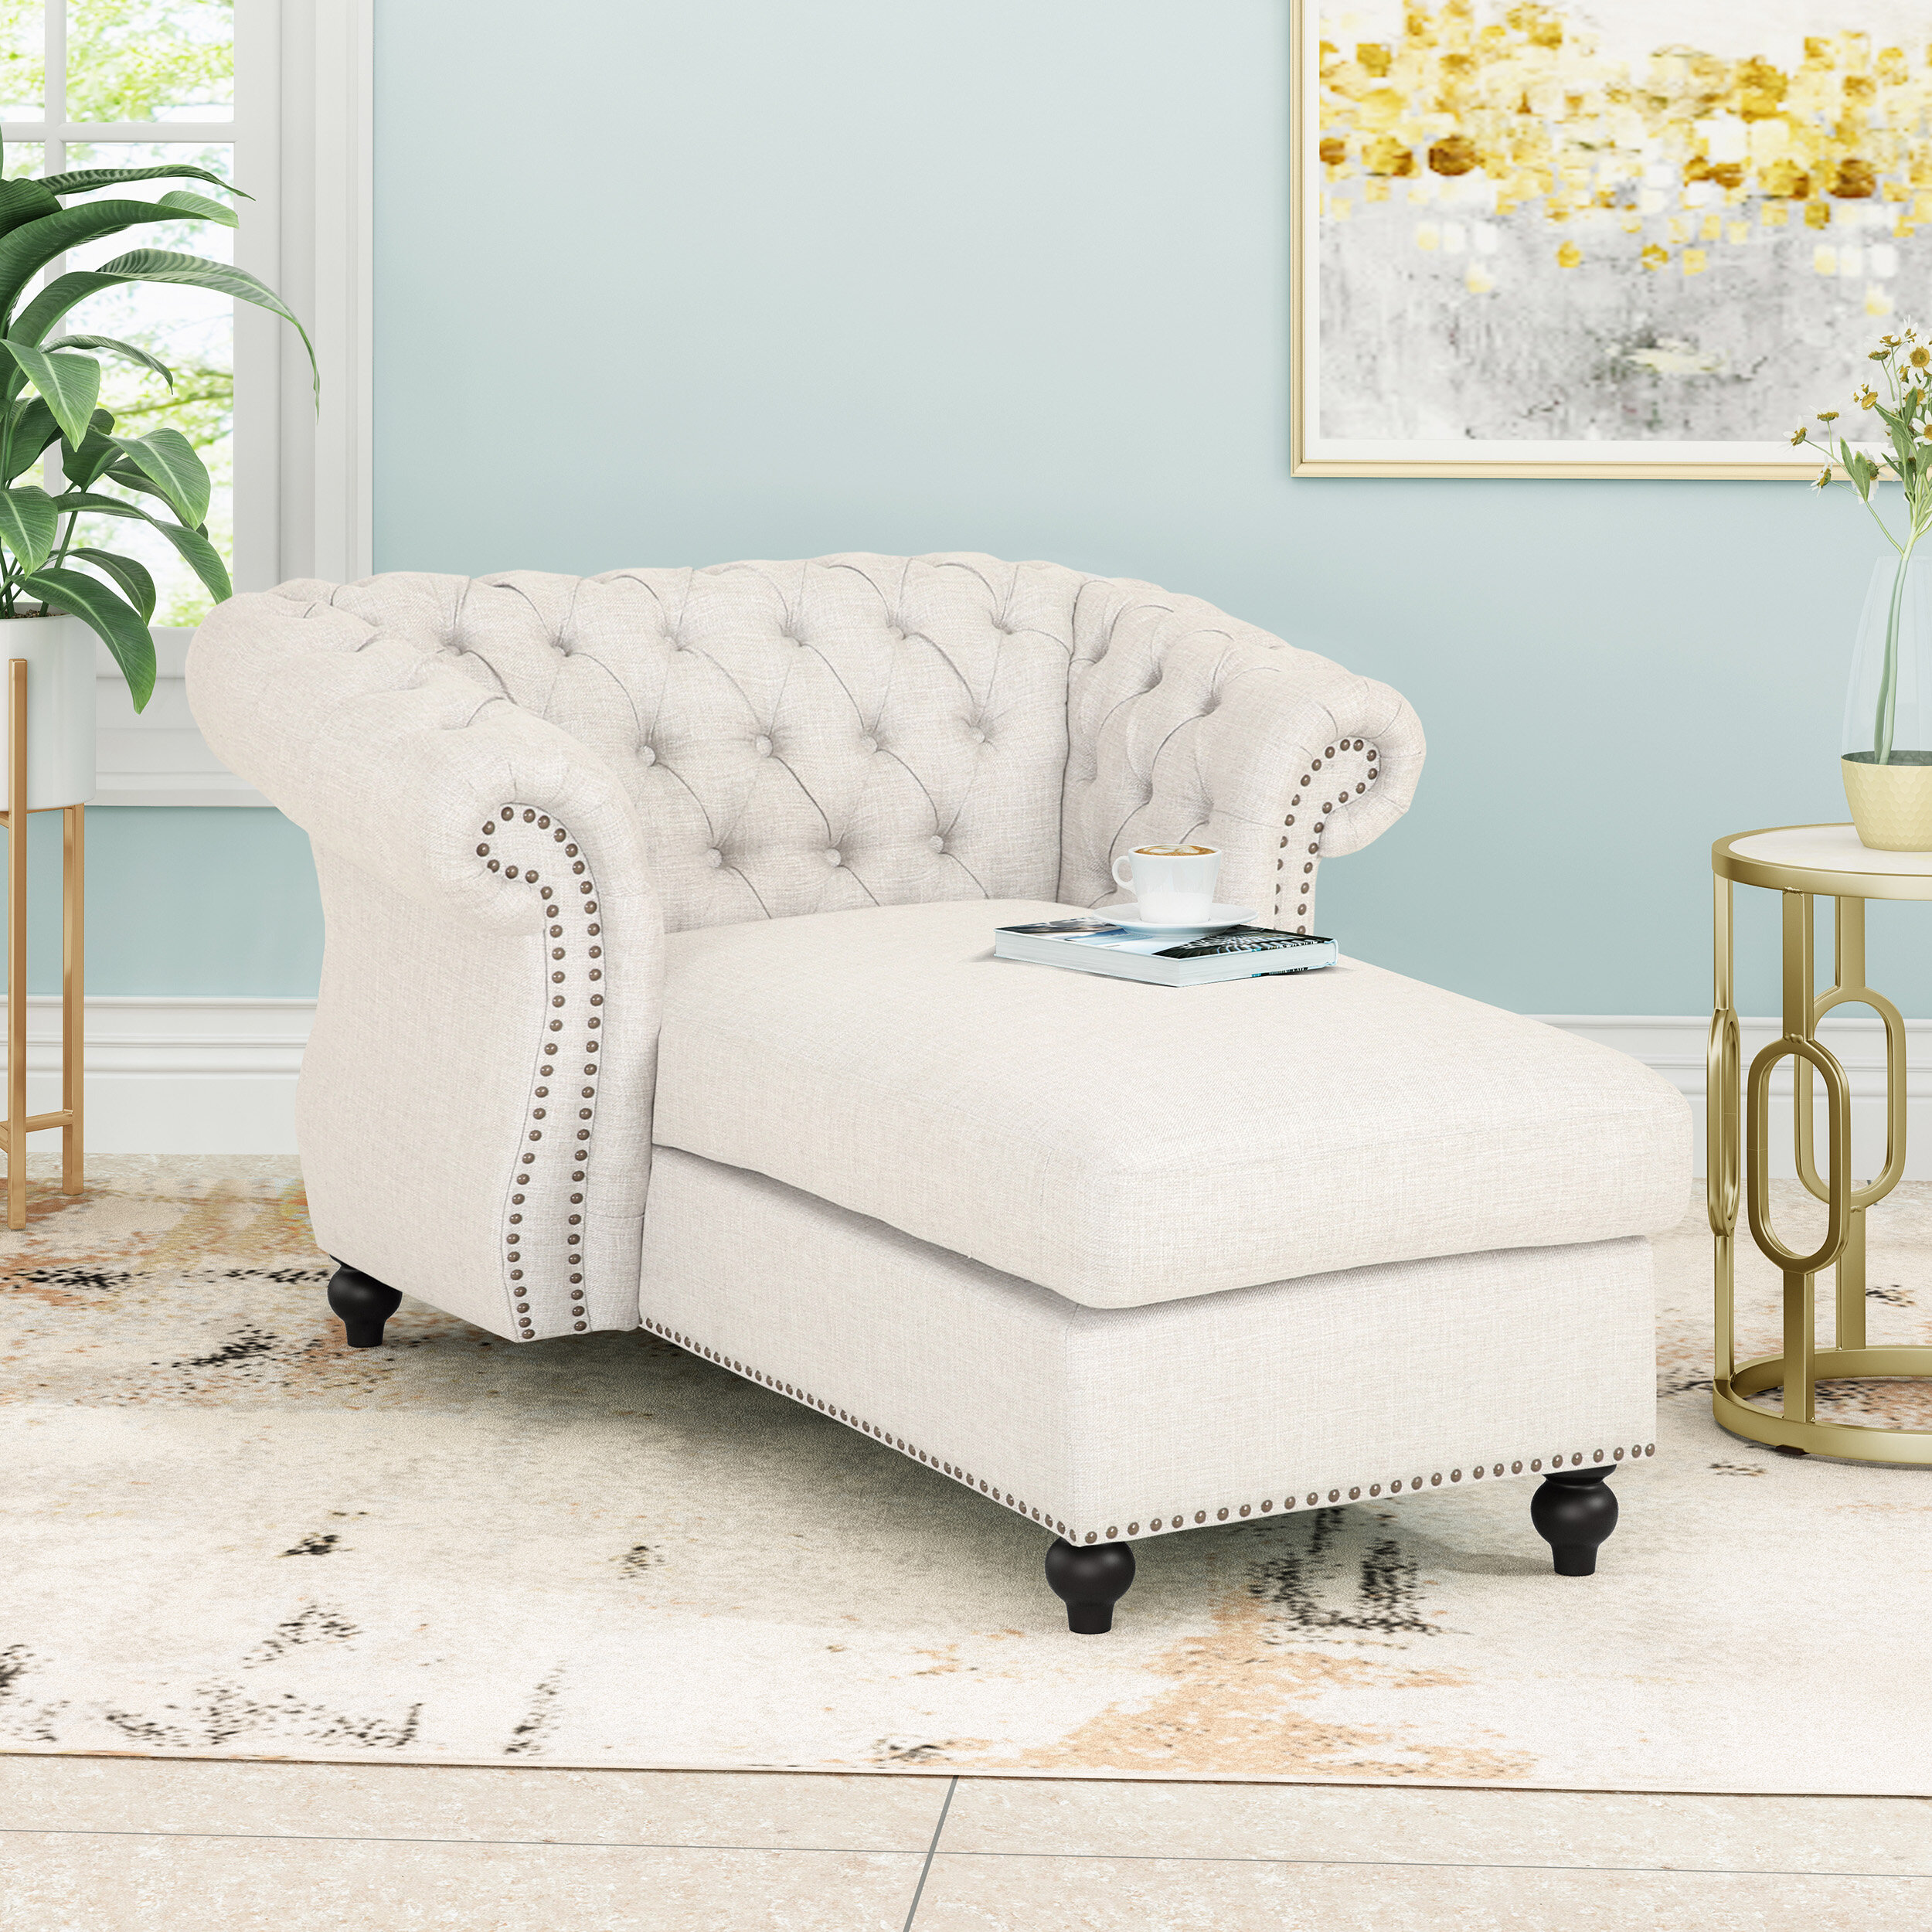 Hankins Upholstered Chaise Lounge